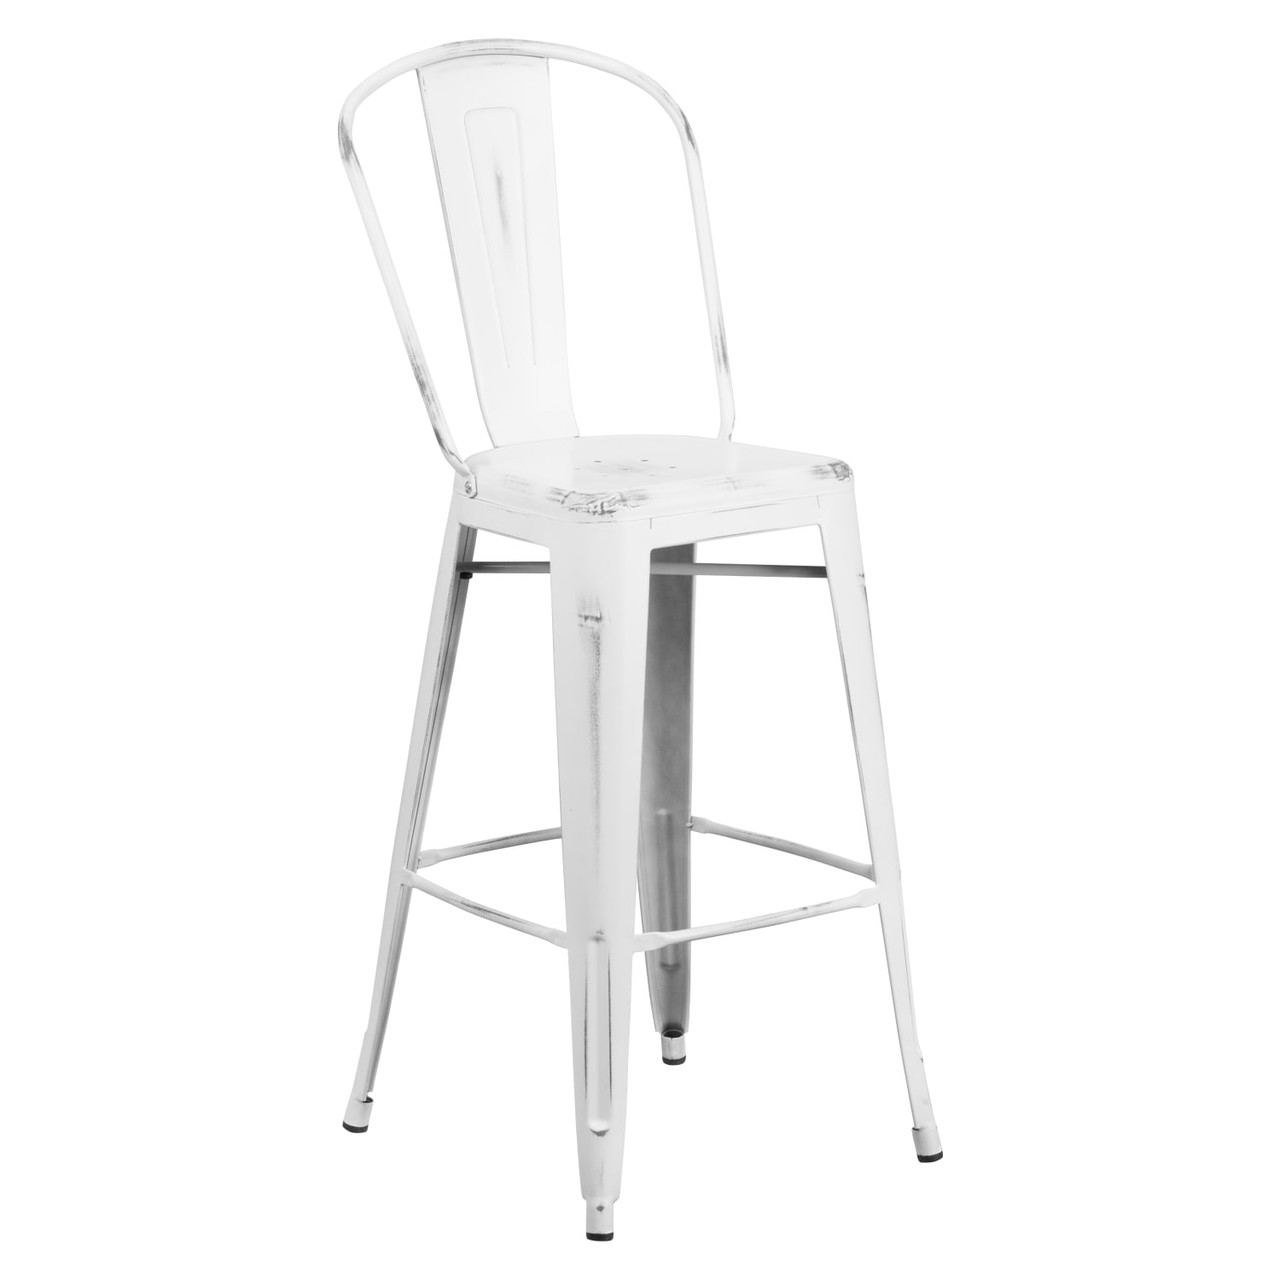 30” High Distressed White Metal Indoor-Outdoor Barstool with Back